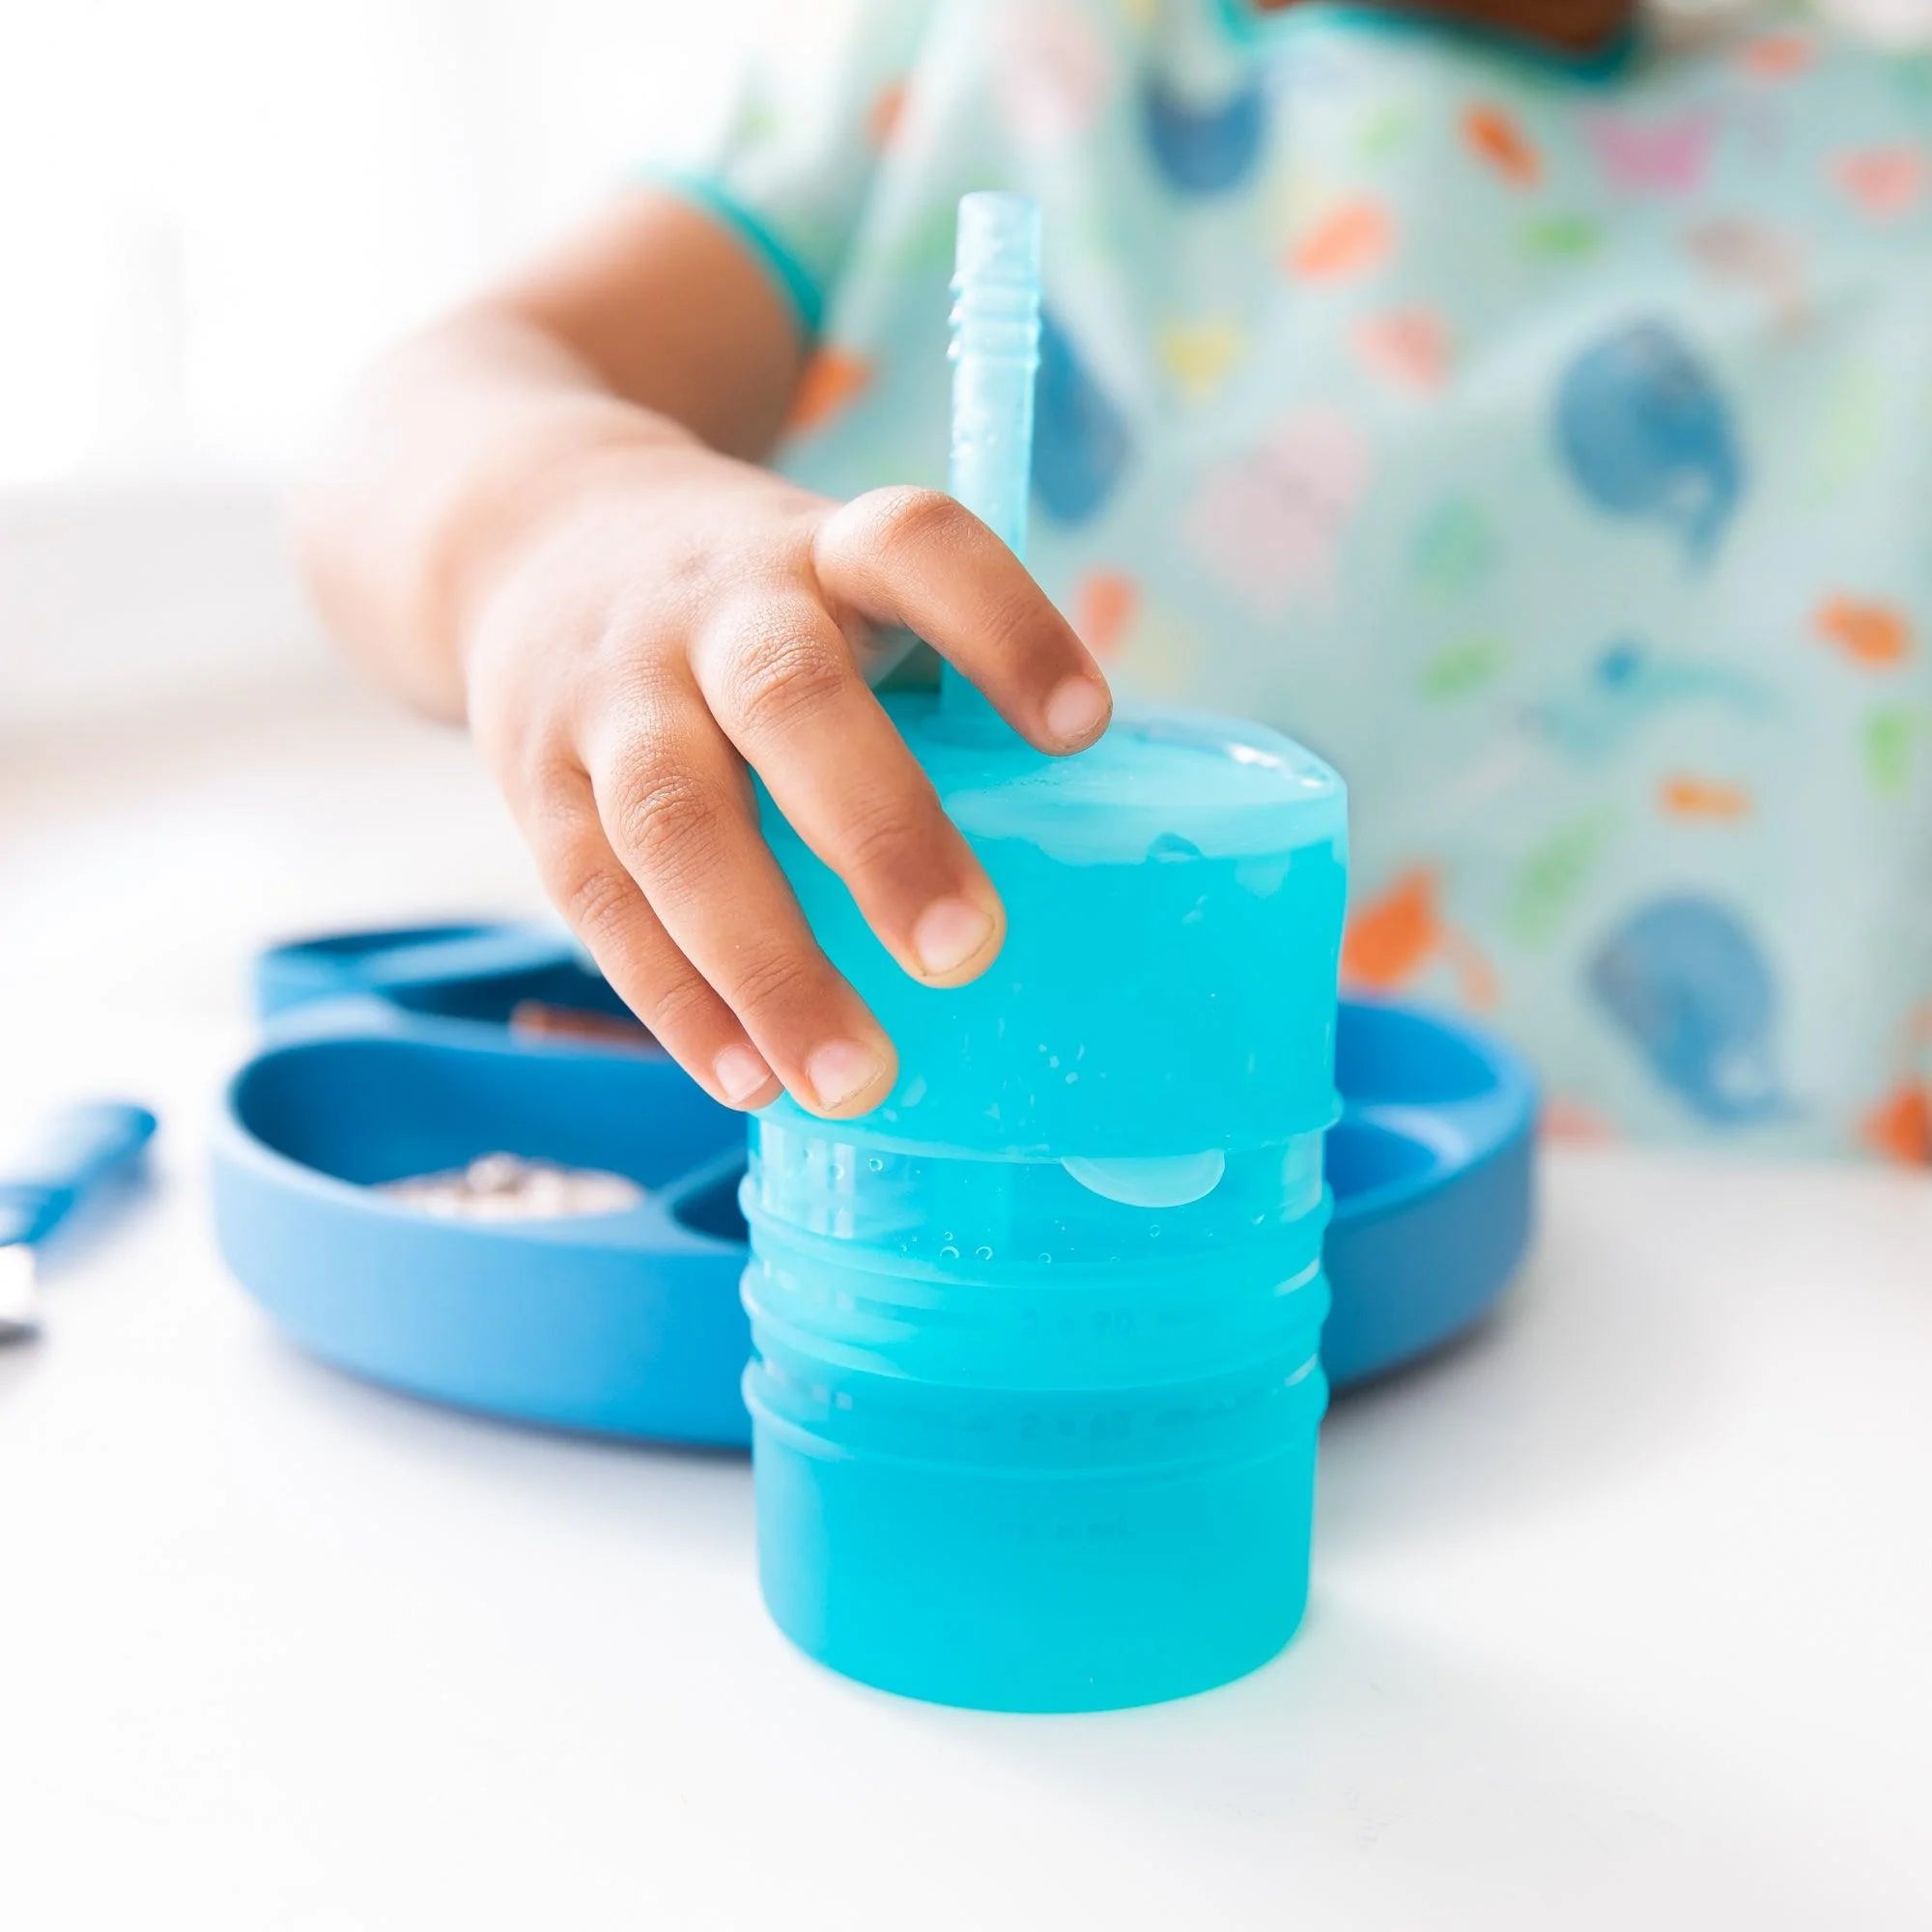 Bumkins Silicone Training Cup, Straw and Lid, Baby, Toddler, Holds 7oz, Ages 12 Months+ (Blue)